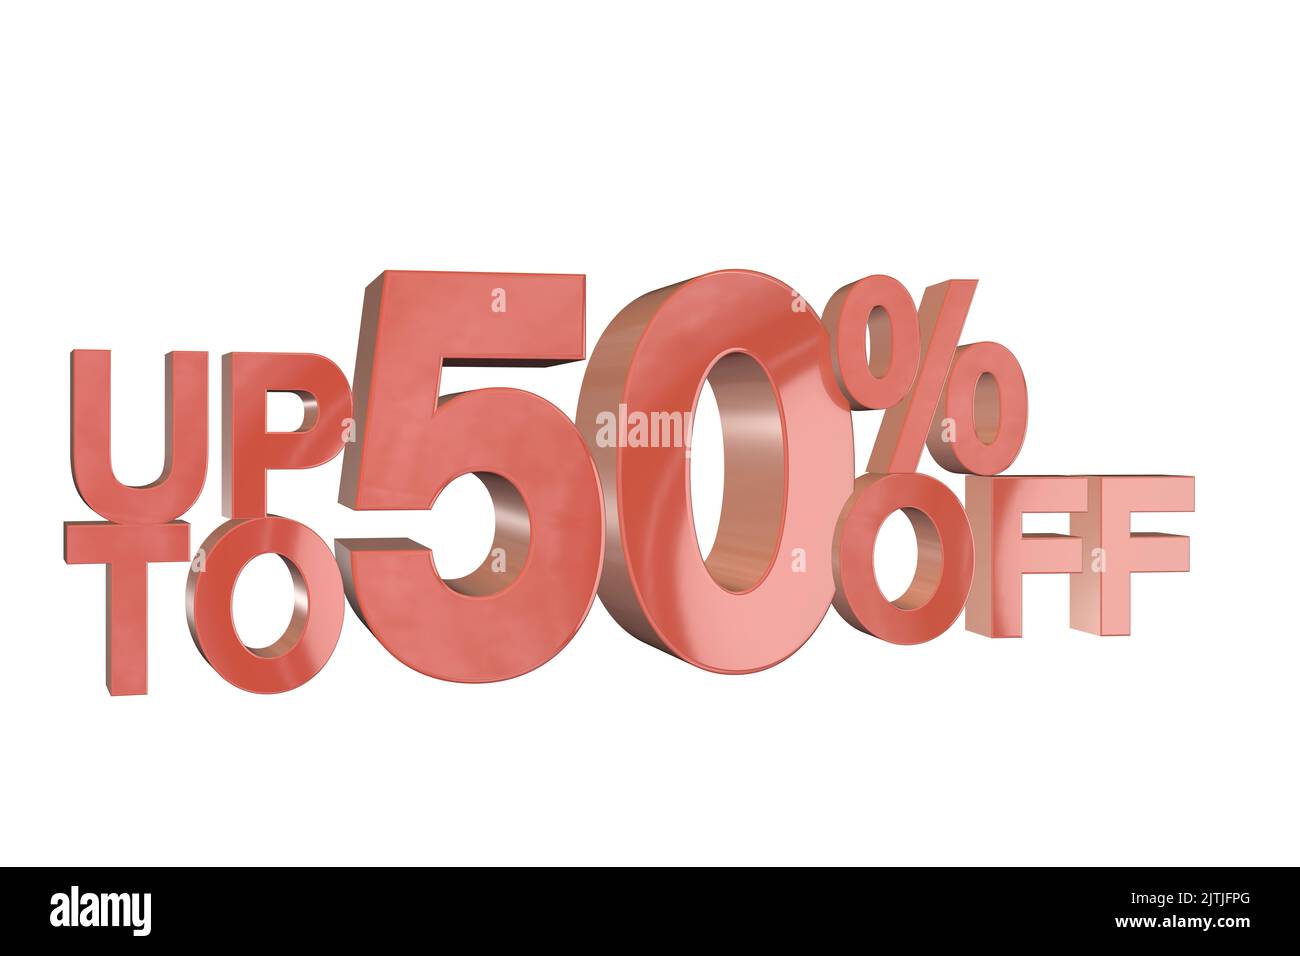 up to 50% off background 3D rendered discount banner marketing sign showing minus - up to upto 50% percent off Stock Photo